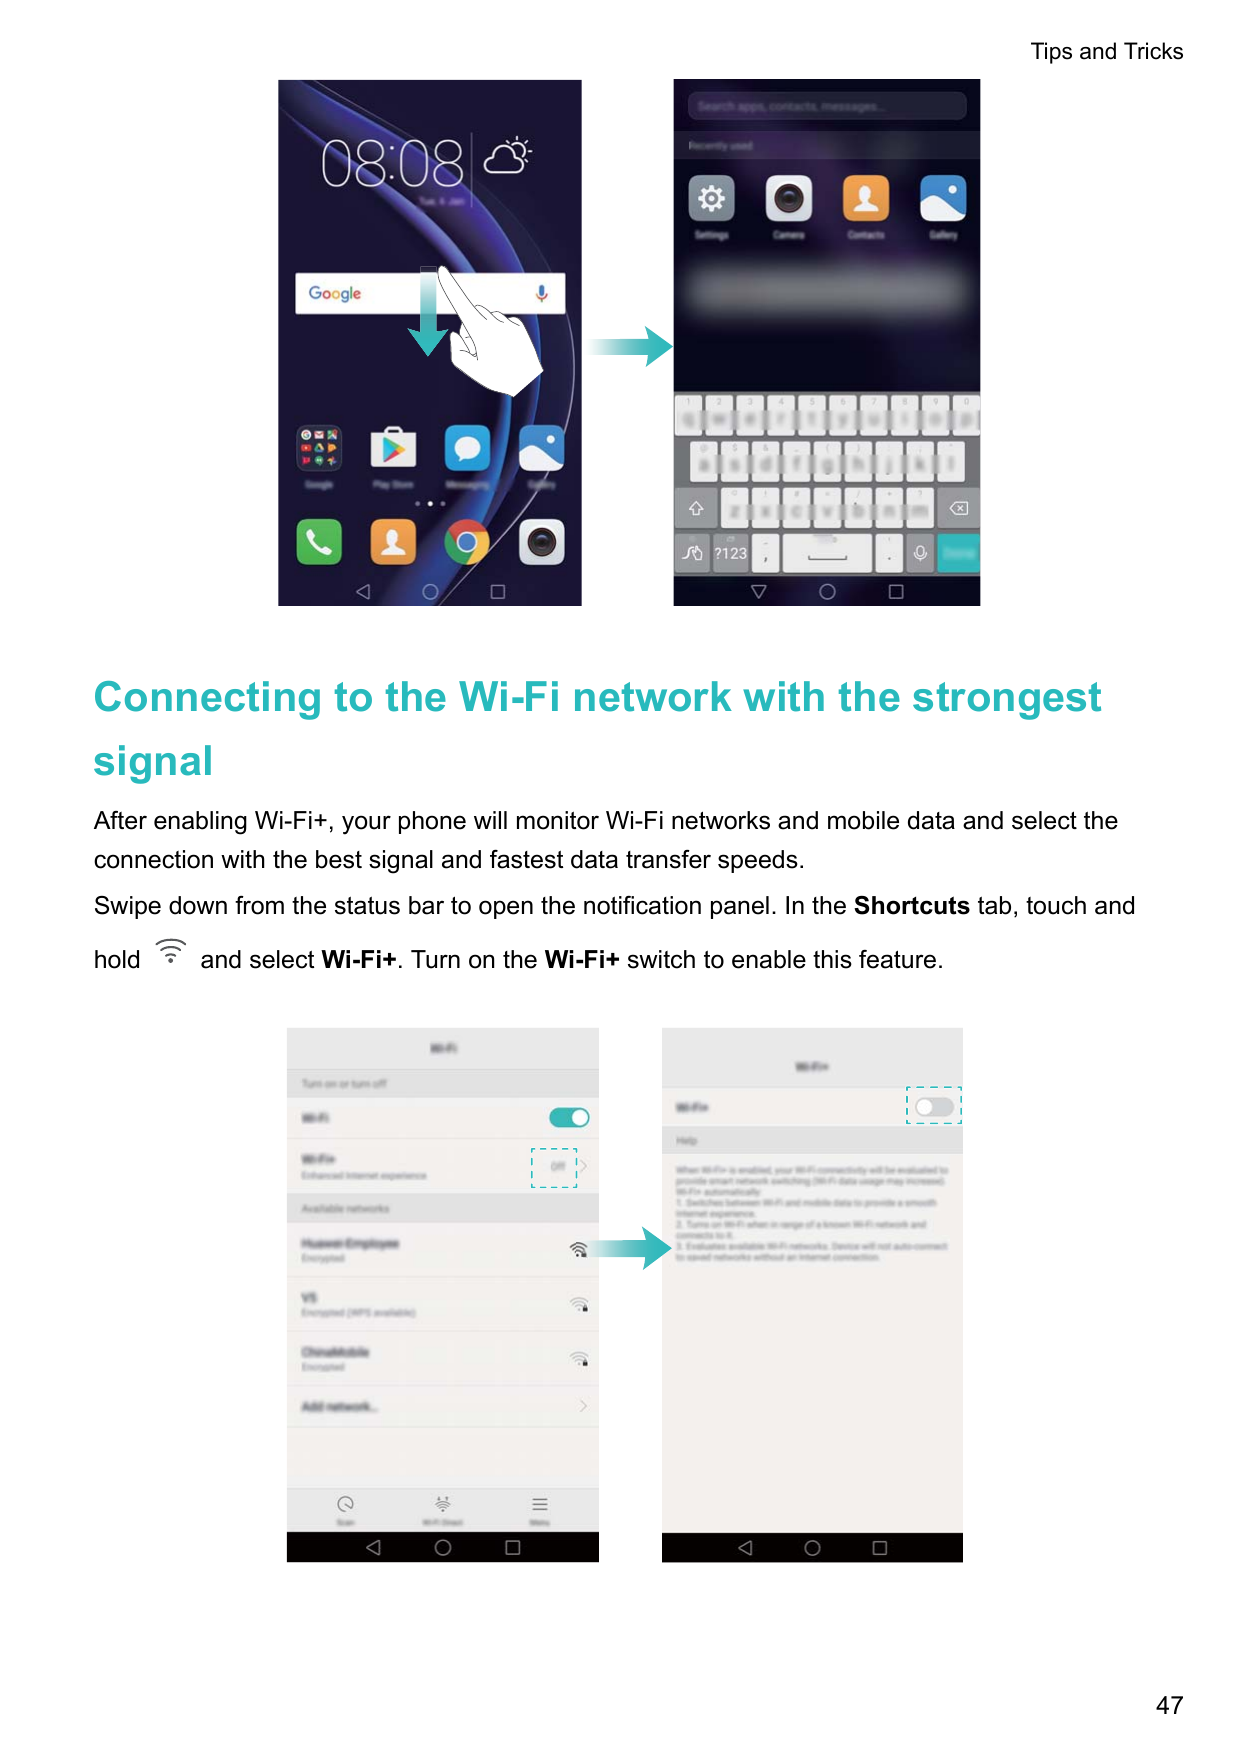 Tips and TricksConnecting to the Wi-Fi network with the strongestsignalAfter enabling Wi-Fi+, your phone will monitor Wi-Fi netw